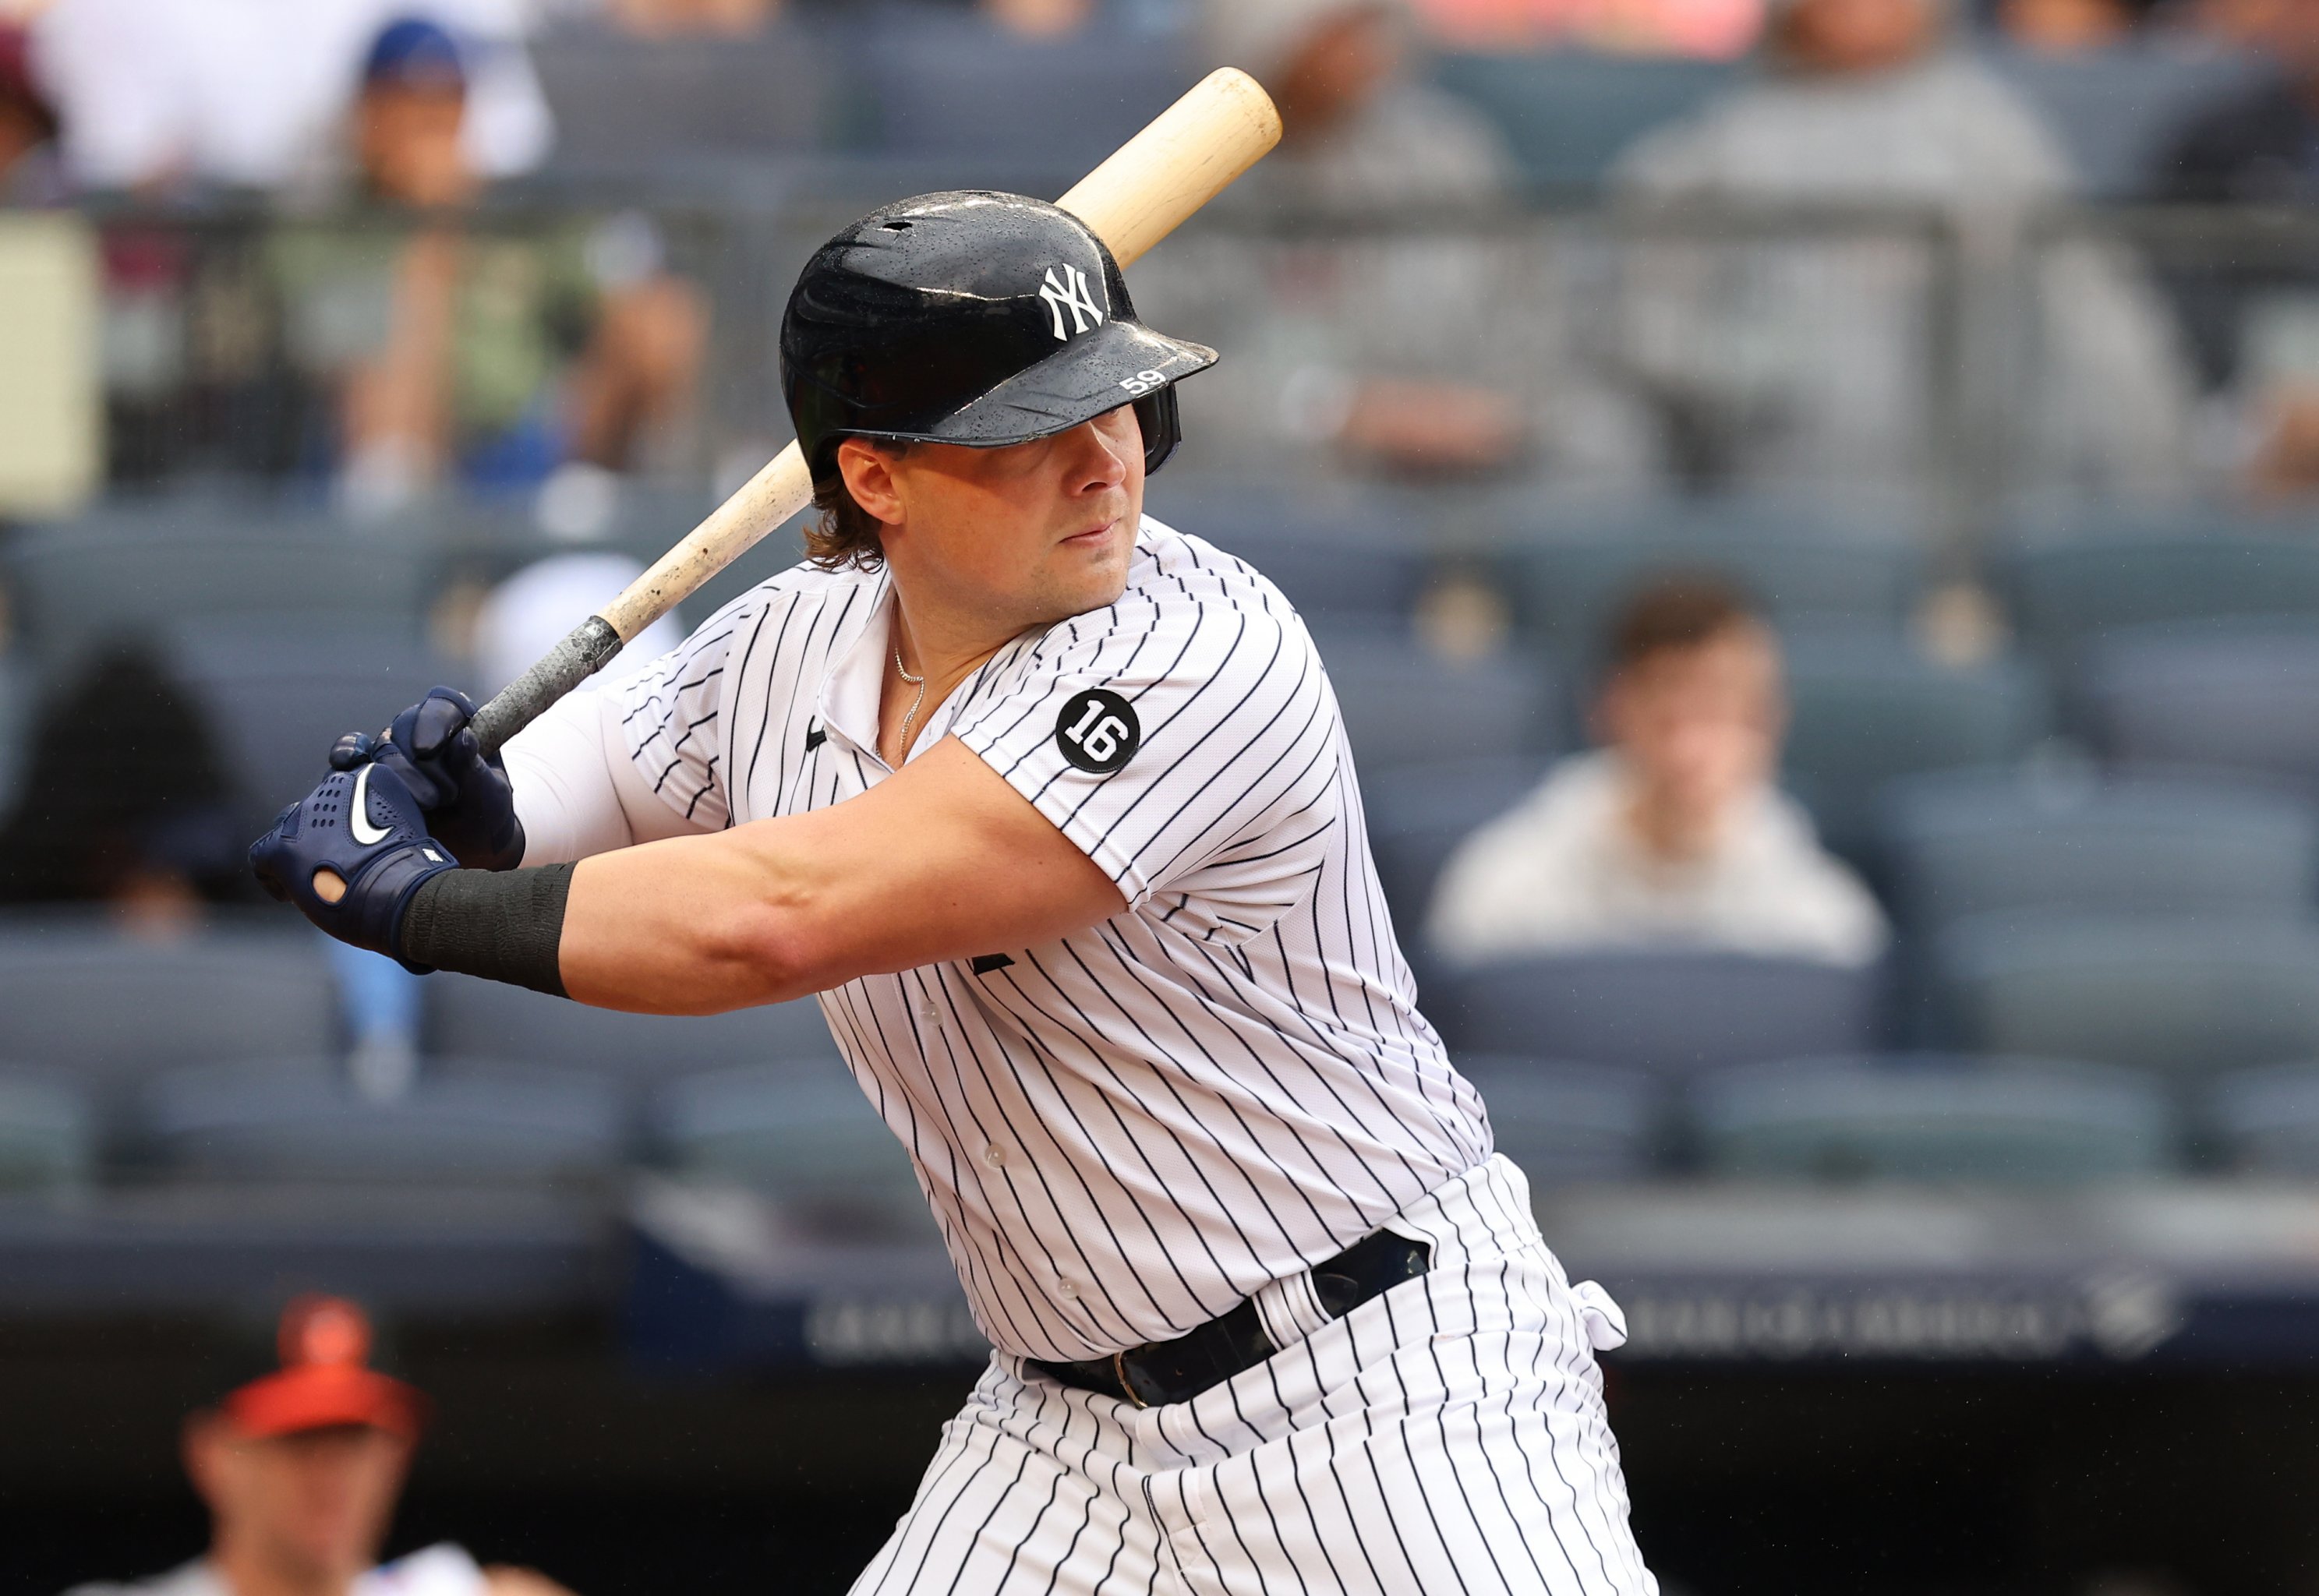 Brewers Rumors: Crew Have Checked In on Yankees 1B Luke Voit